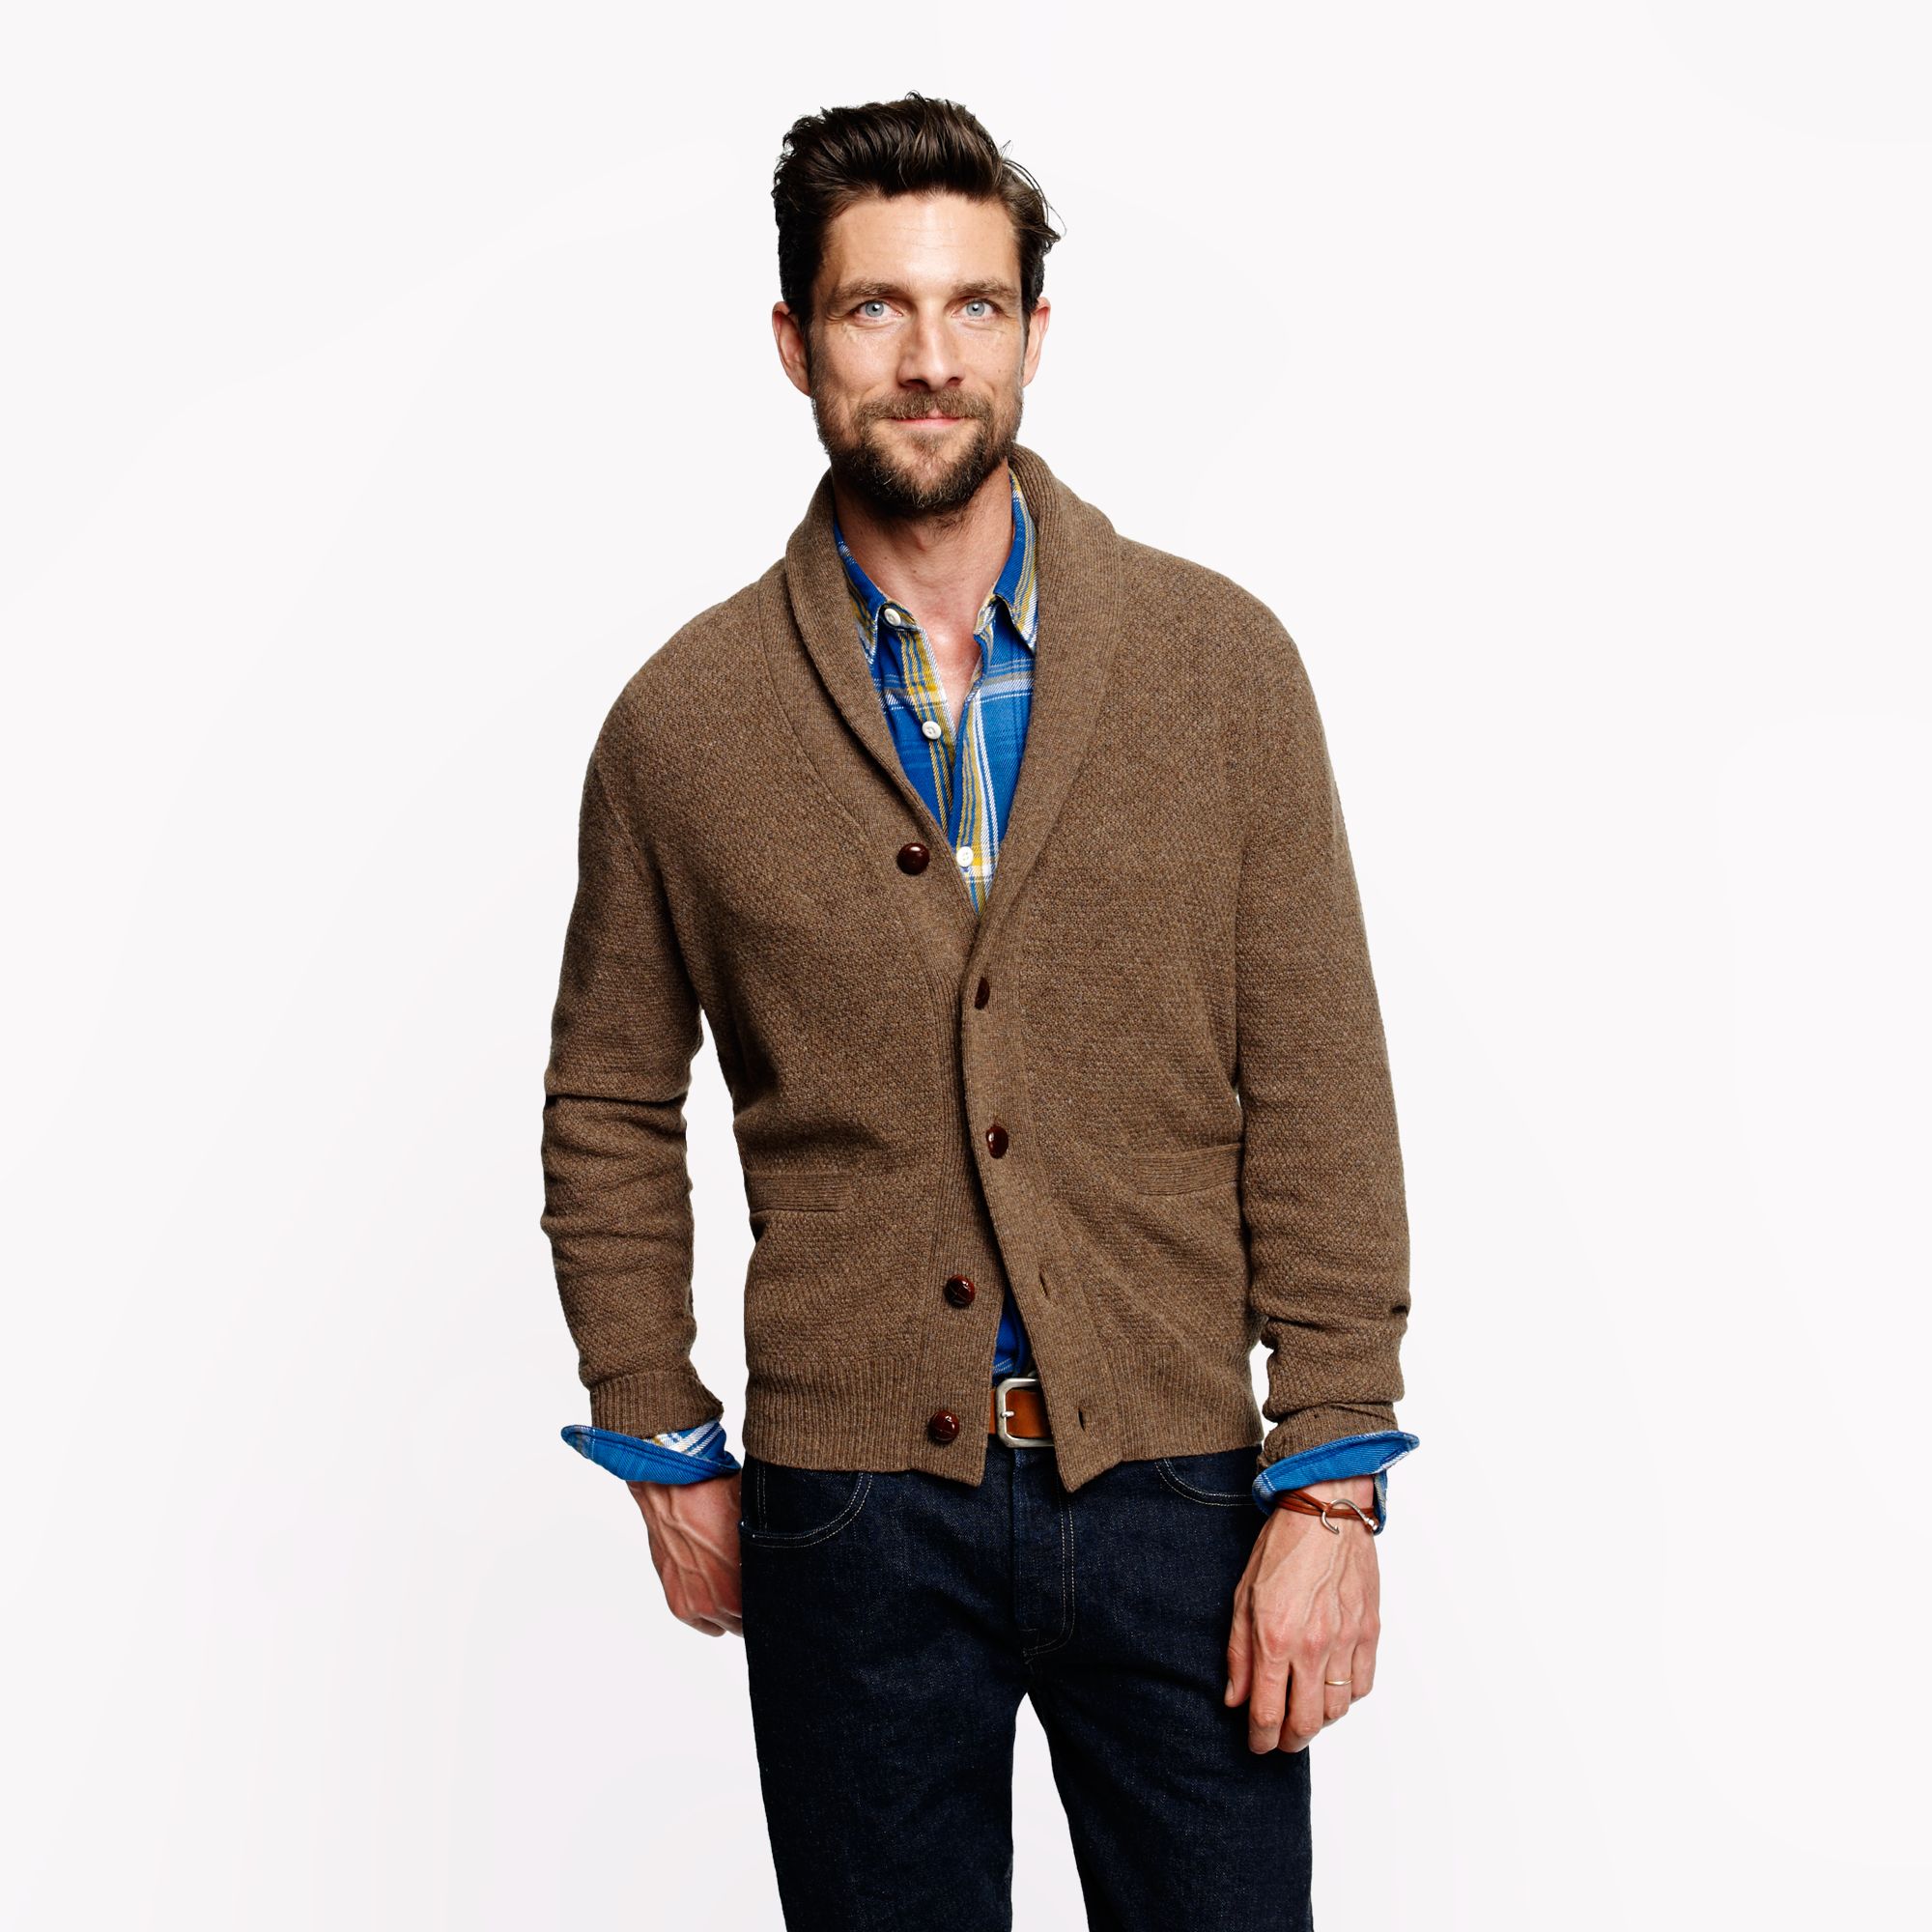 Lyst - J.Crew Lambs Wool Shawl Collar Elbow Patch Sweater in Brown for Men